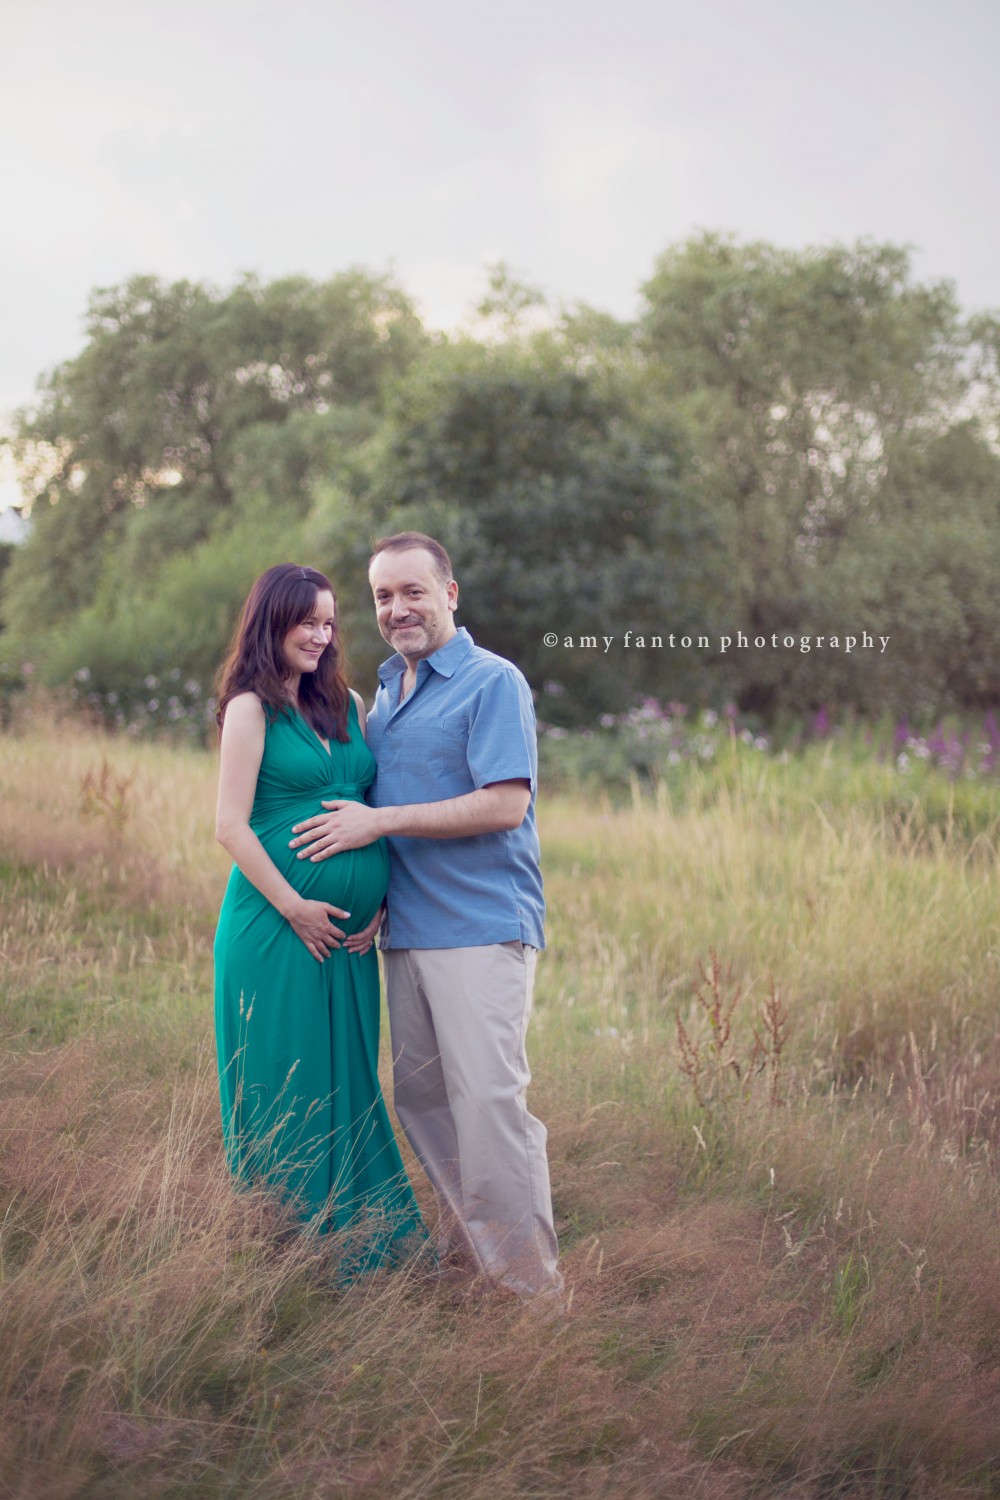 Outdoor Maternity Photography in London